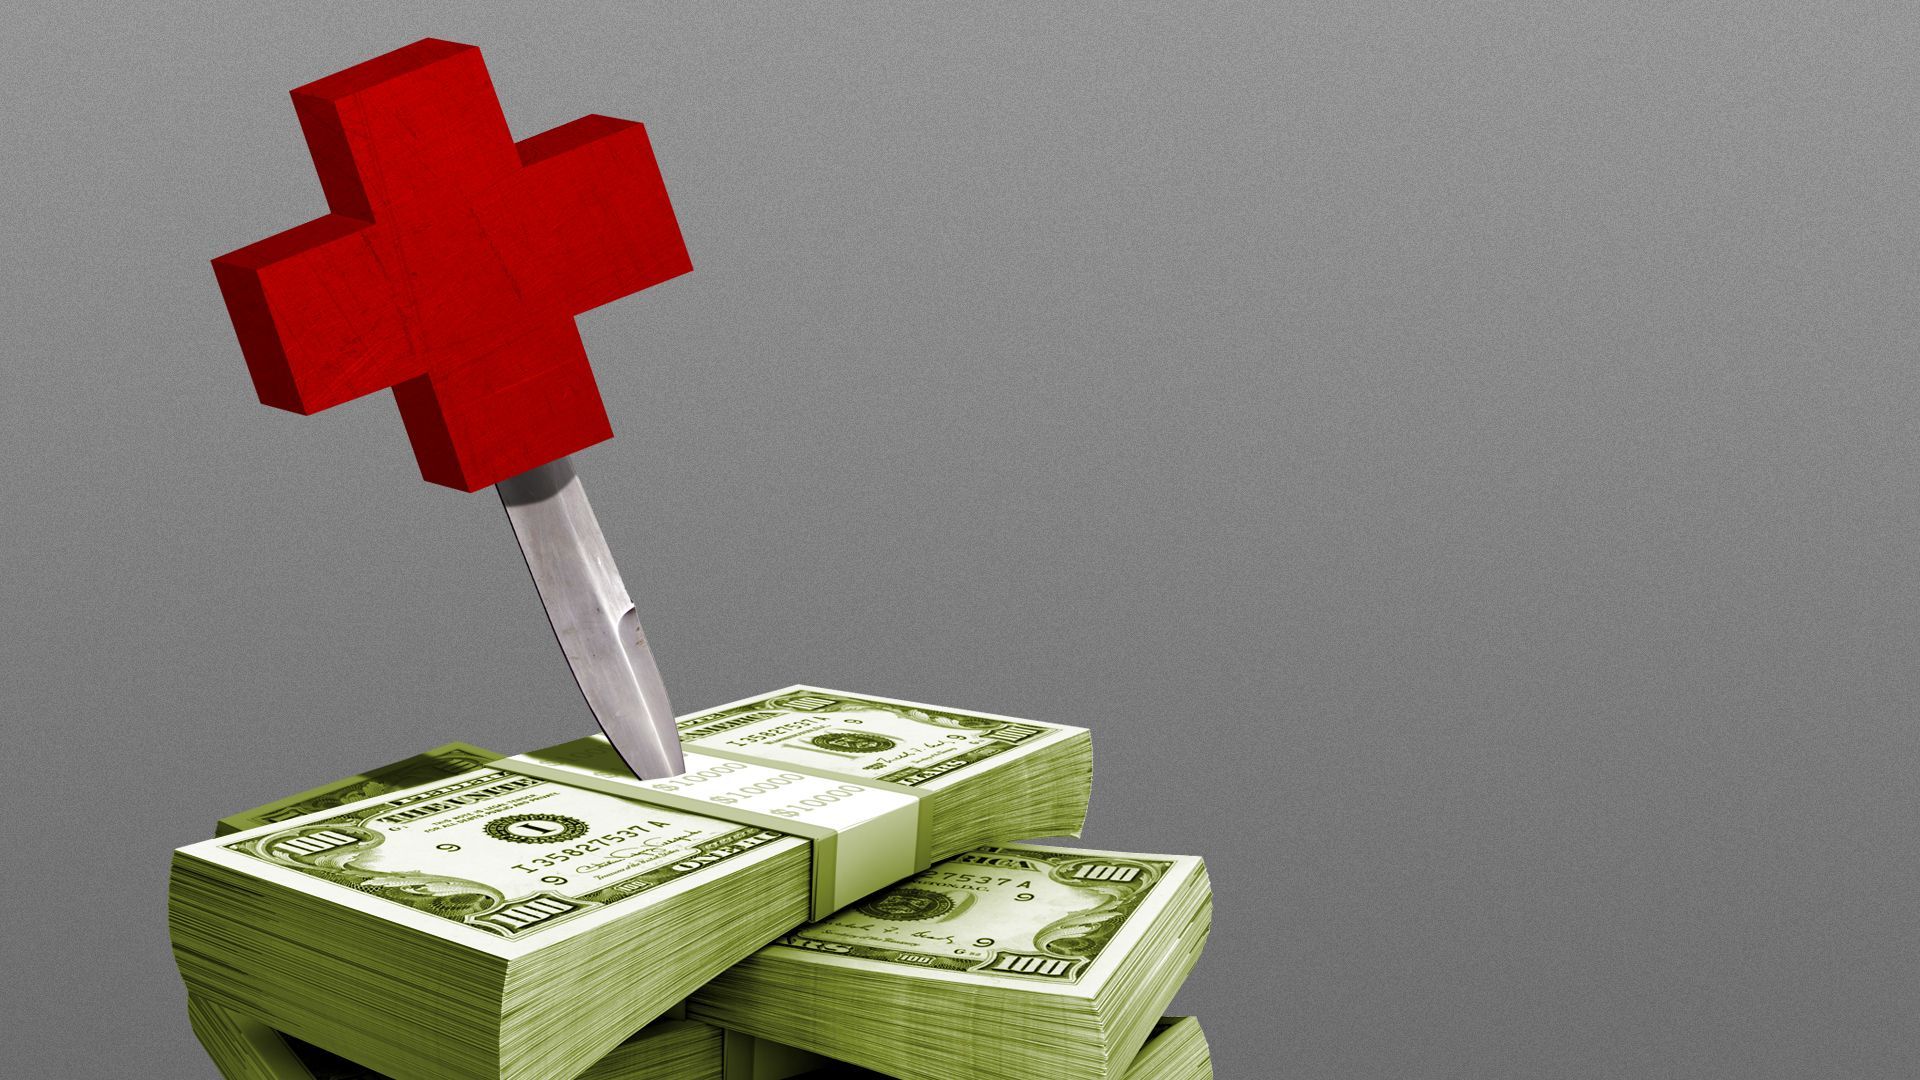 Illustration of a knife with a red cross handled in a stack of money